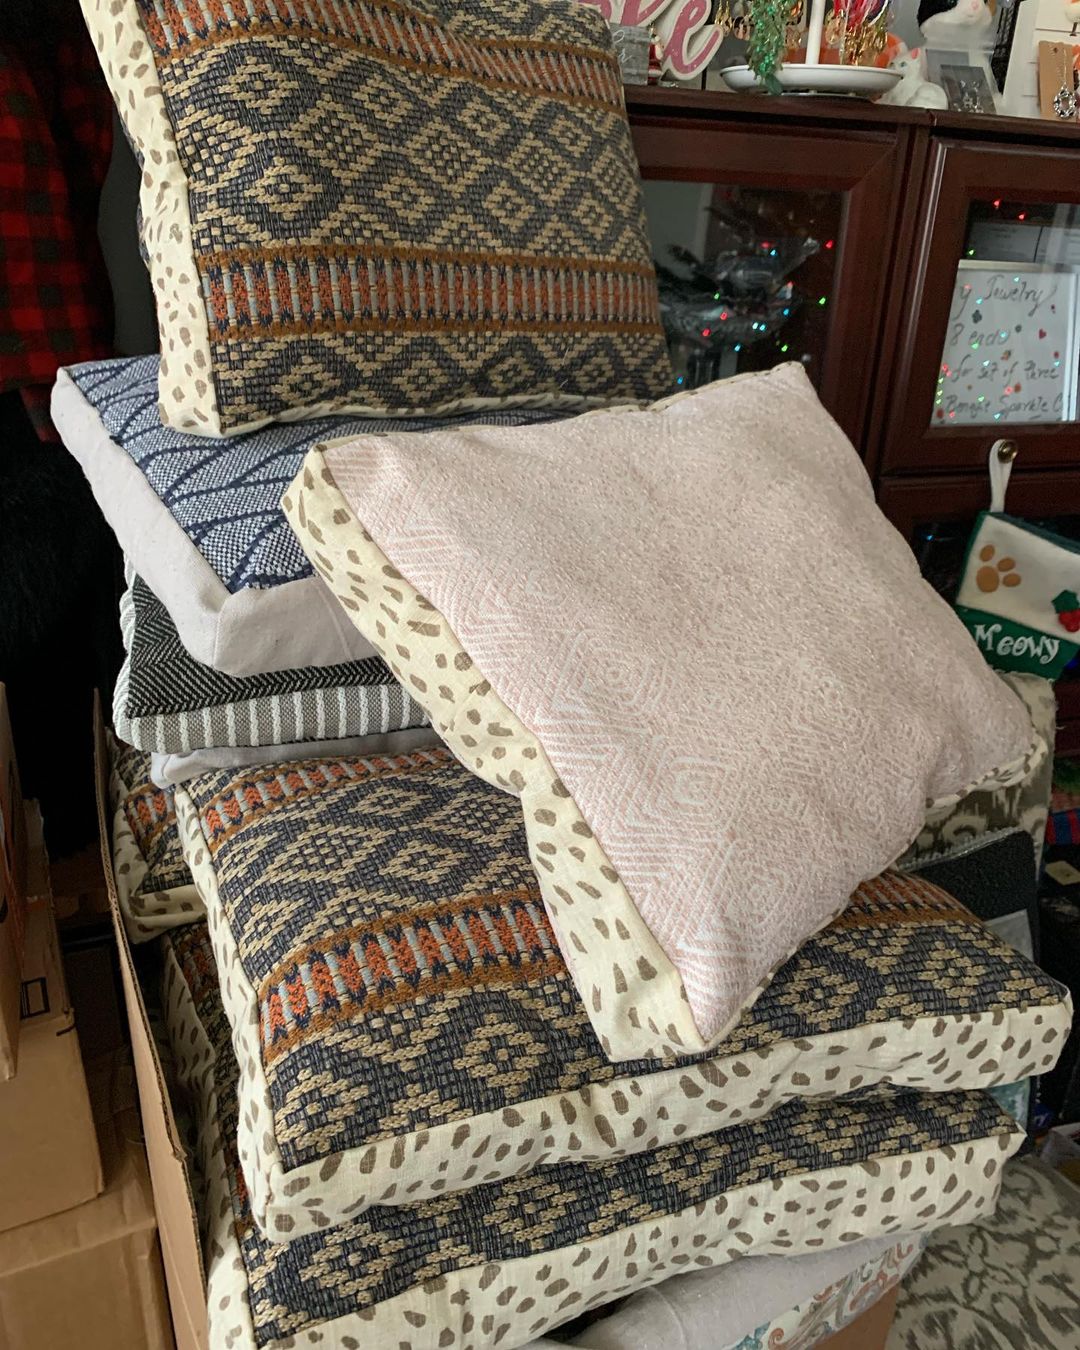 Look at these beautiful handmade pillows a supporter sewed and donated yesterday! Just Beautiful! Thank you so much, Yvonne! They will be loved by foster kitties and they can take their pillow when they get adopted! 
.
.
.
.
<a target='_blank' href='https://www.instagram.com/explore/tags/handmadewithlove/'>#handmadewithlove</a> <a target='_blank' href='https://www.instagram.com/explore/tags/artsandcrafts/'>#artsandcrafts</a> <a target='_blank' href='https://www.instagram.com/explore/tags/sewing/'>#sewing</a> <a target='_blank' href='https://www.instagram.com/explore/tags/catpillow/'>#catpillow</a> <a target='_blank' href='https://www.instagram.com/explore/tags/thankyou/'>#thankyou</a> <a target='_blank' href='https://www.instagram.com/explore/tags/communitysupport/'>#communitysupport</a> <a target='_blank' href='https://www.instagram.com/explore/tags/catlover/'>#catlover</a> <a target='_blank' href='https://www.instagram.com/explore/tags/rescuecats/'>#rescuecats</a> <a target='_blank' href='https://www.instagram.com/explore/tags/catsofinstagram/'>#catsofinstagram</a> <a target='_blank' href='https://www.instagram.com/explore/tags/fosteringsaveslives/'>#fosteringsaveslives</a> <a target='_blank' href='https://www.instagram.com/explore/tags/burlingtonnc/'>#burlingtonnc</a> <a target='_blank' href='https://www.instagram.com/explore/tags/blessed/'>#blessed</a>